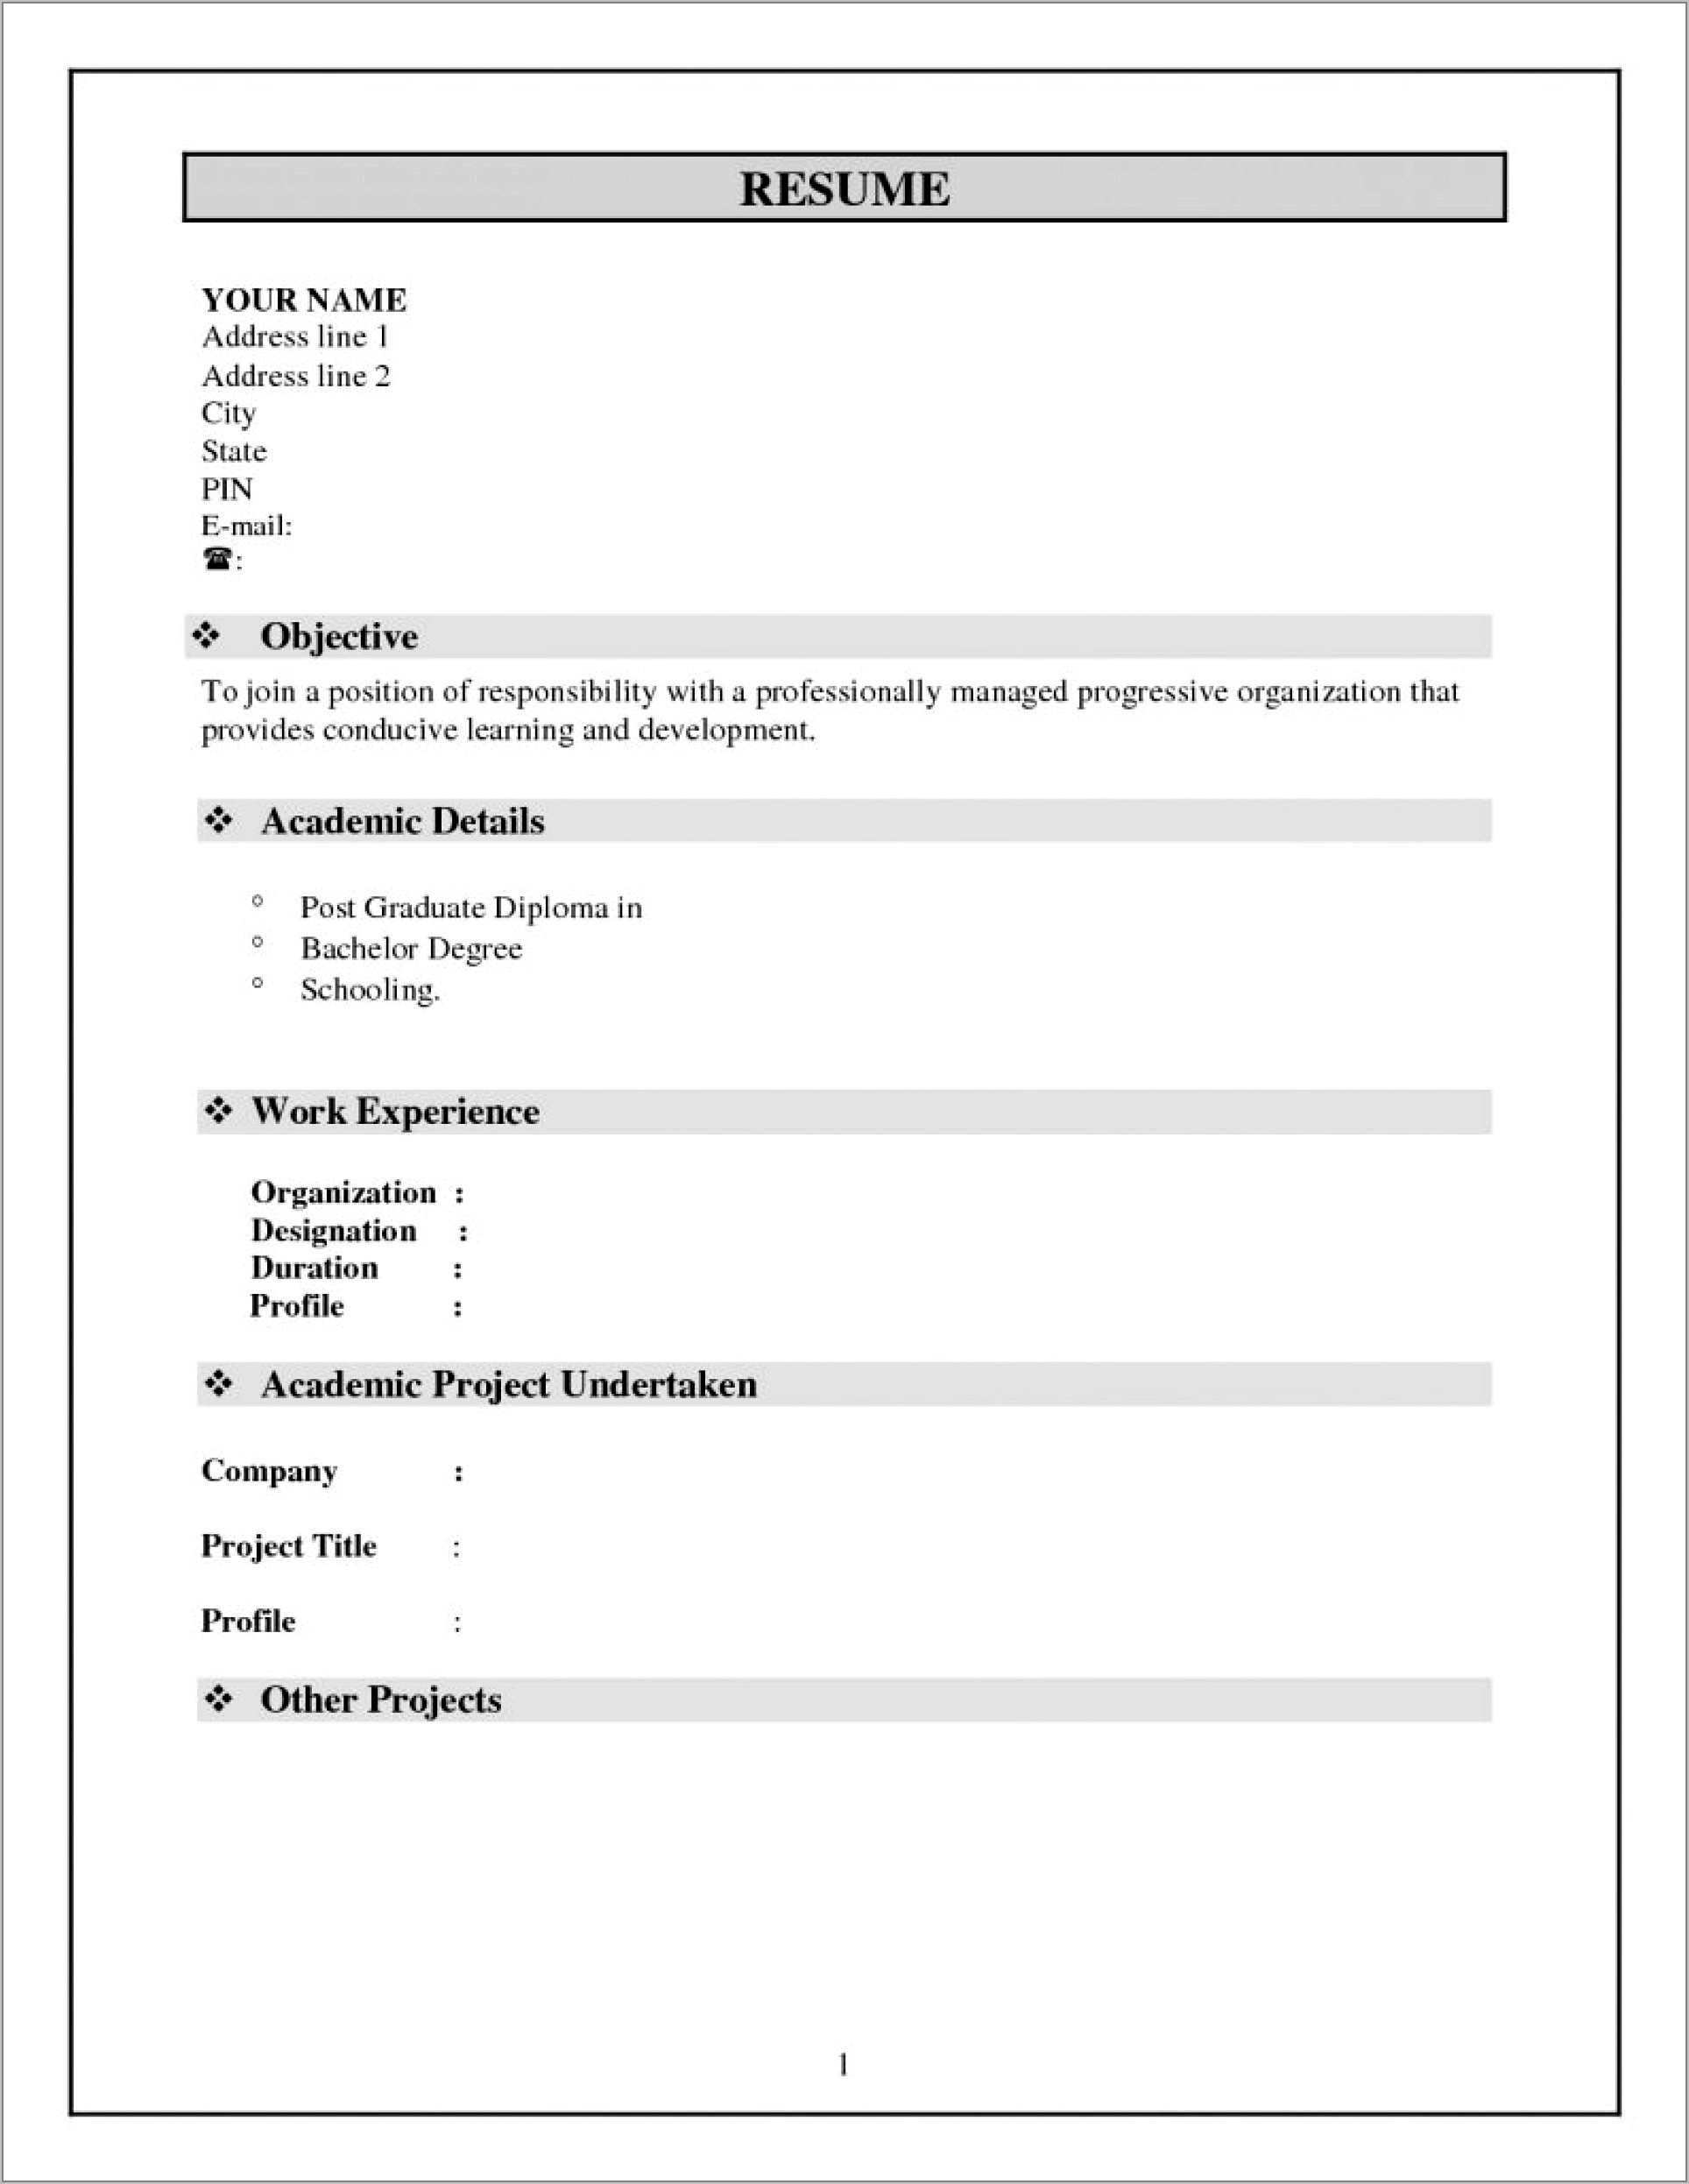 Student Resume Format Free Download